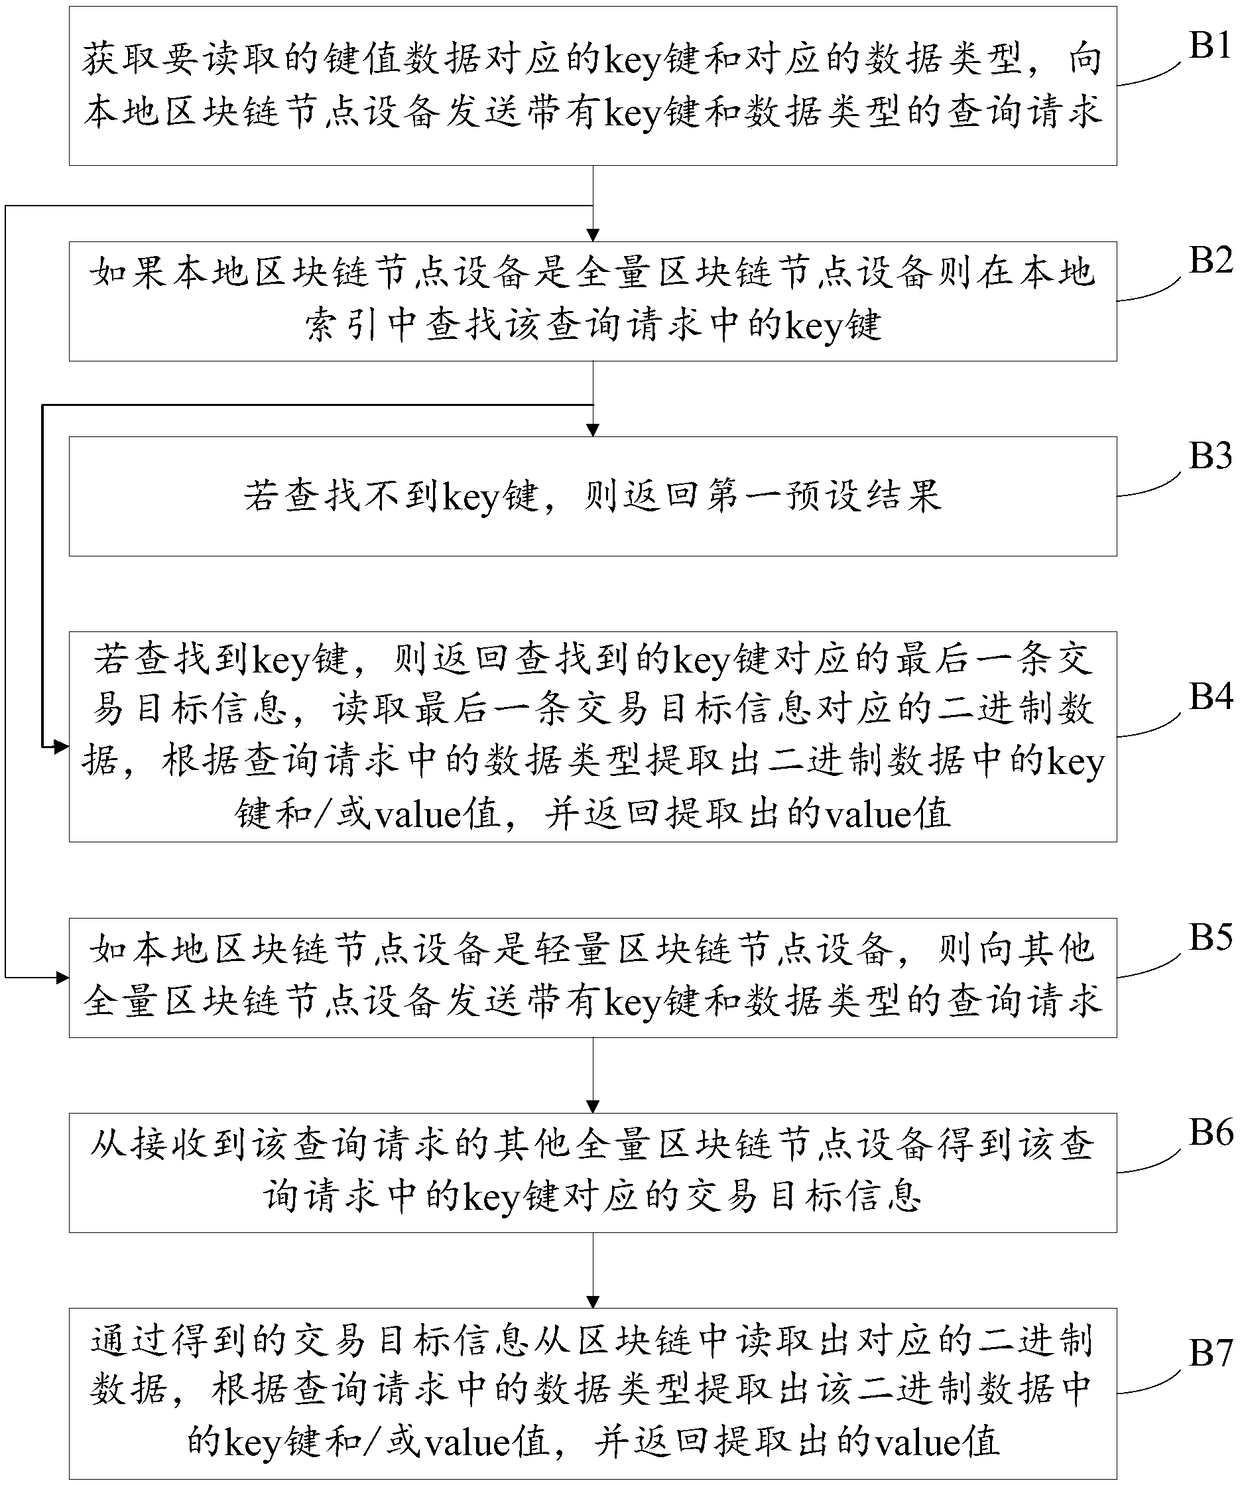 Block chain node equipment and data reading and writing-in method of distributed database